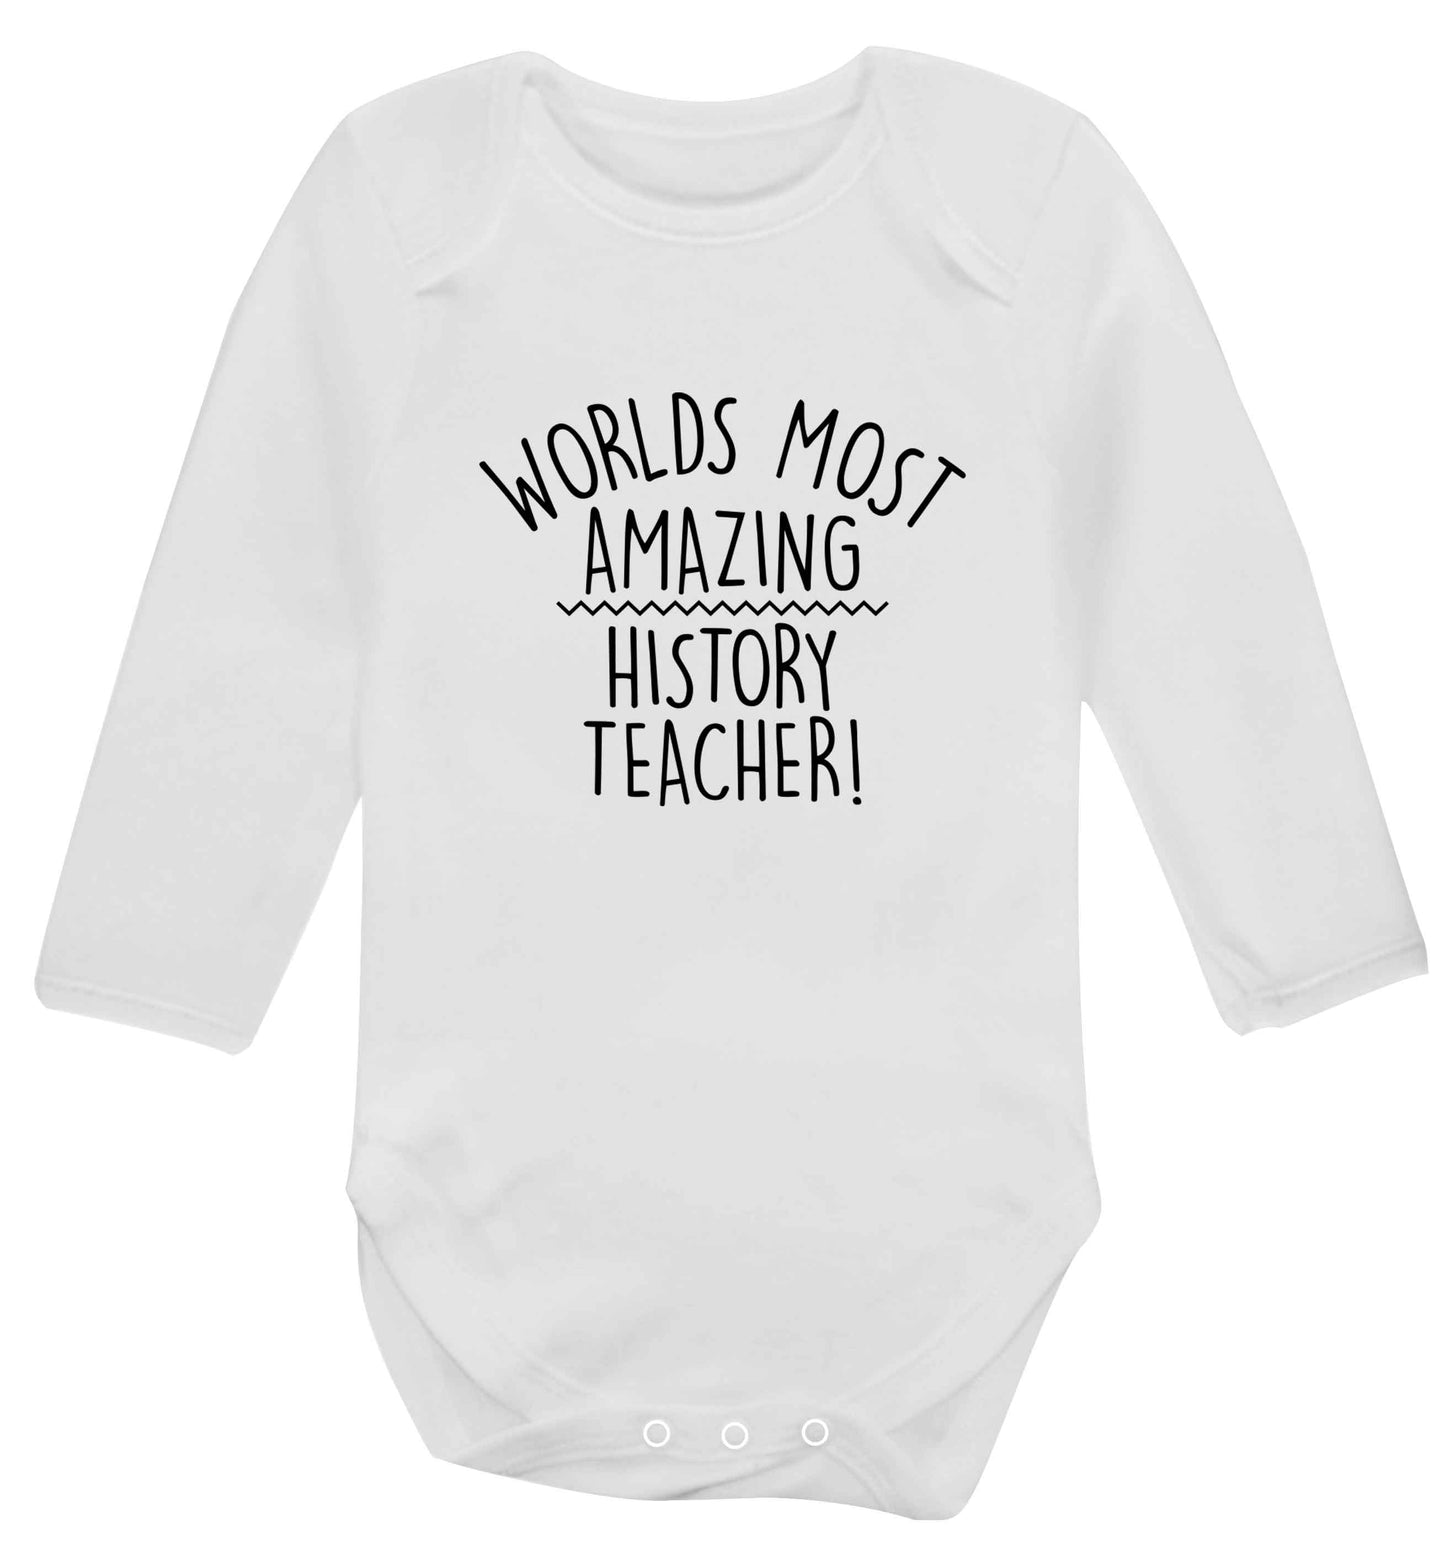 Worlds most amazing History teacher baby vest long sleeved white 6-12 months